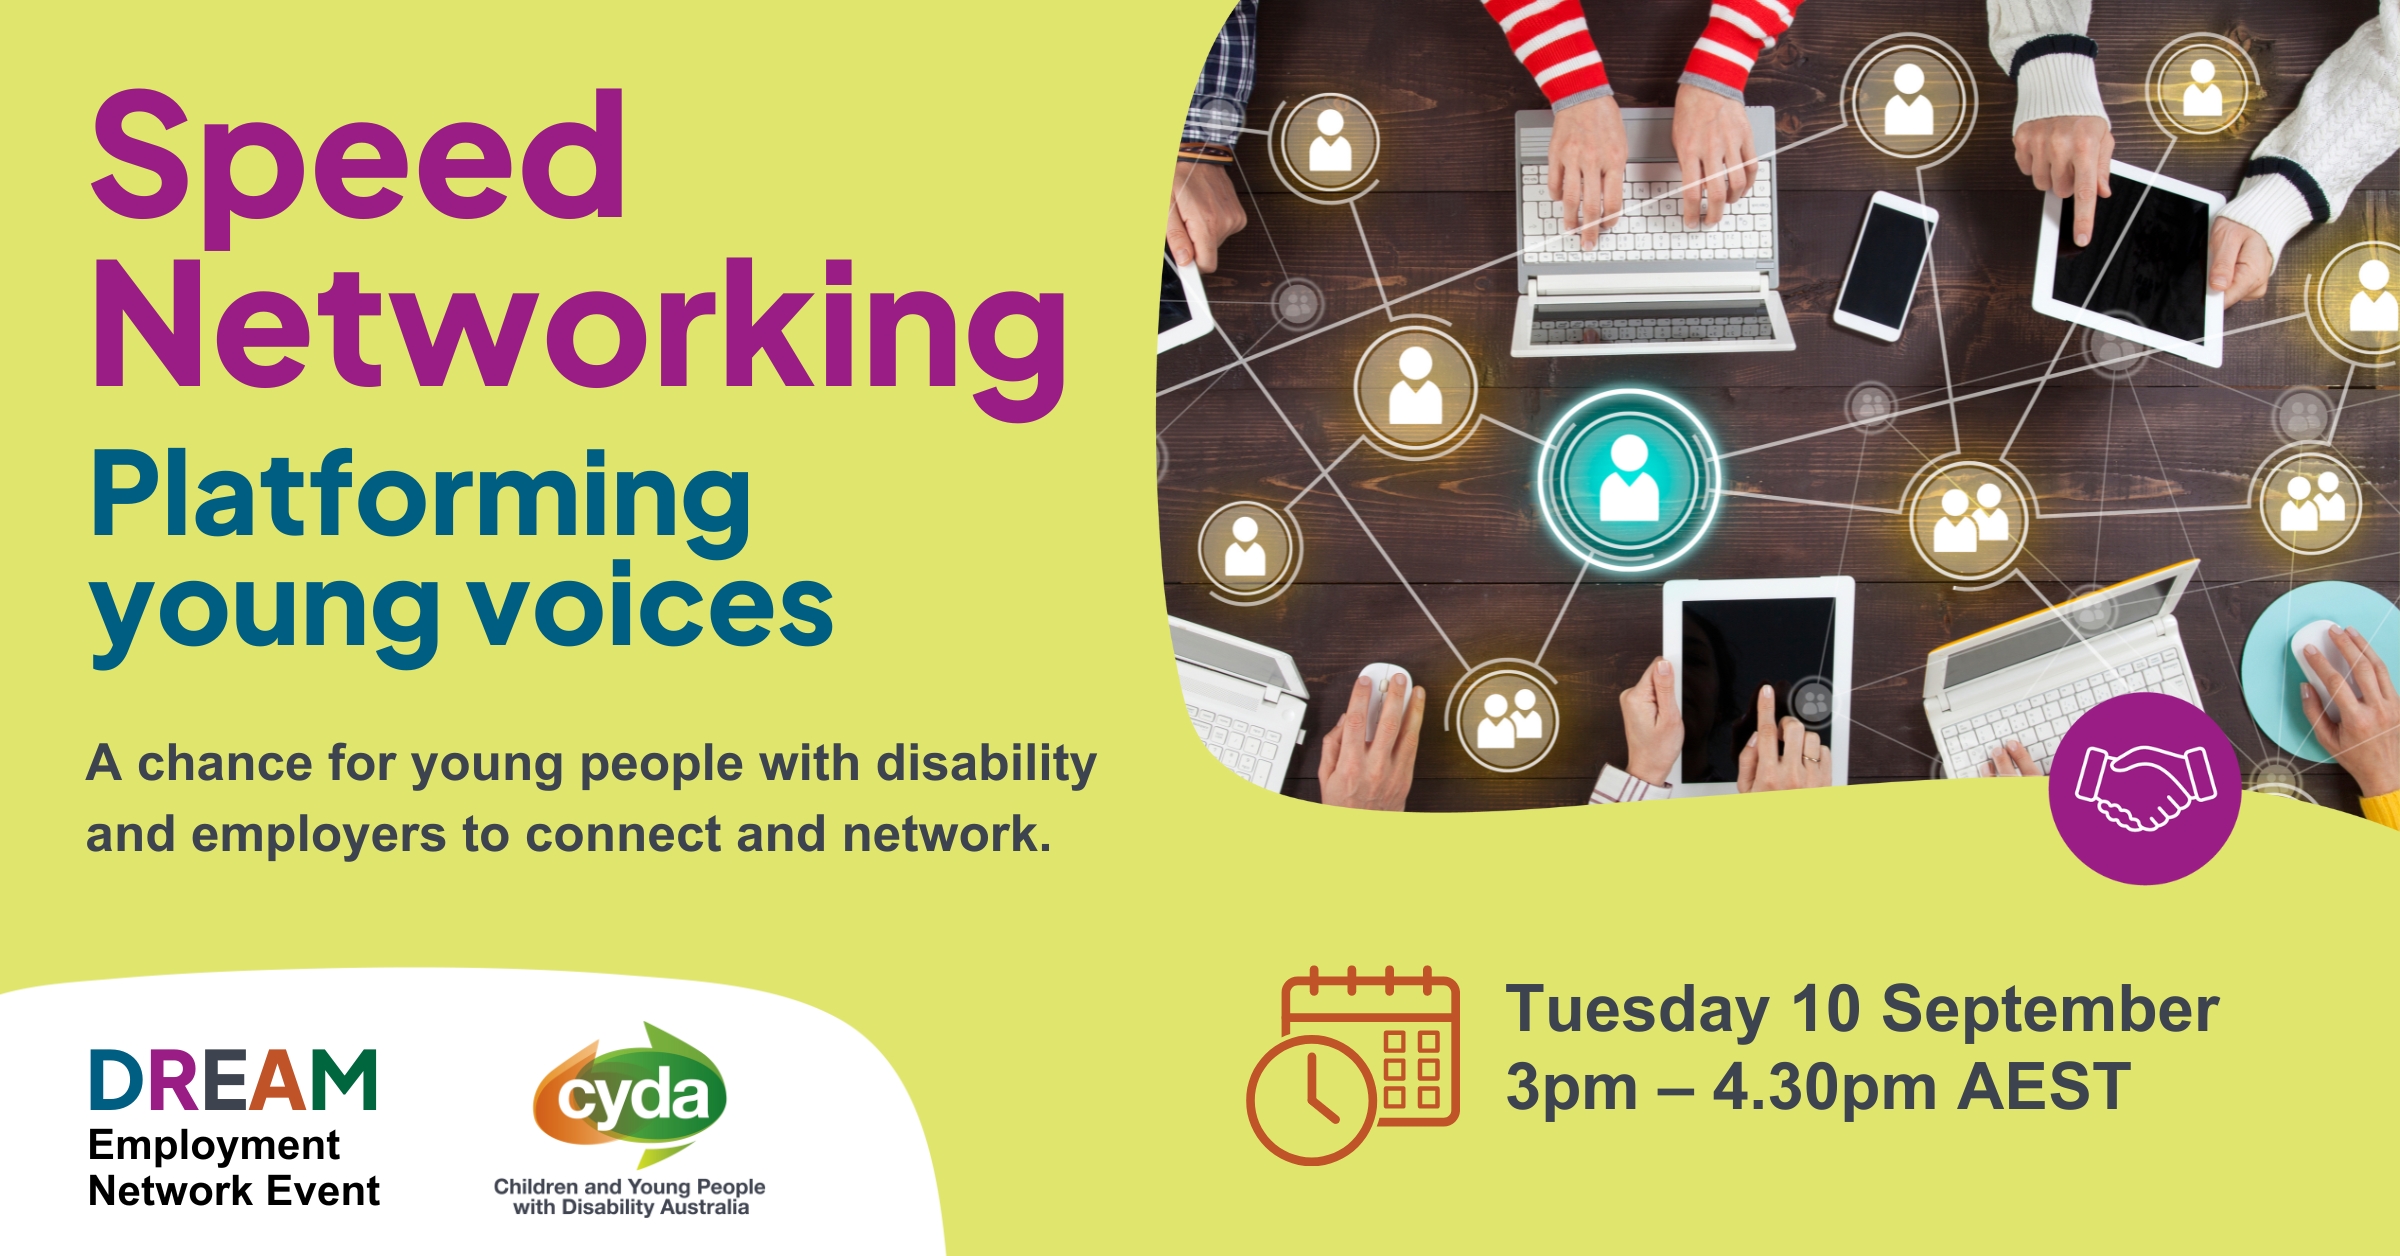 Text on a bright green background reads: "Speed networking, platforming young voices. A chance for young people with disability and employers to connect and network. Tuesday 10 September, 3pm – 4.30pm AEST." Below are the logos for the DREAM Employment Network and CYDA. To the right is a photograph of hands at computers and mobile devices around a wood table, taken from above, overlaid with a graphic of people in circles, networked together with connecting lines.